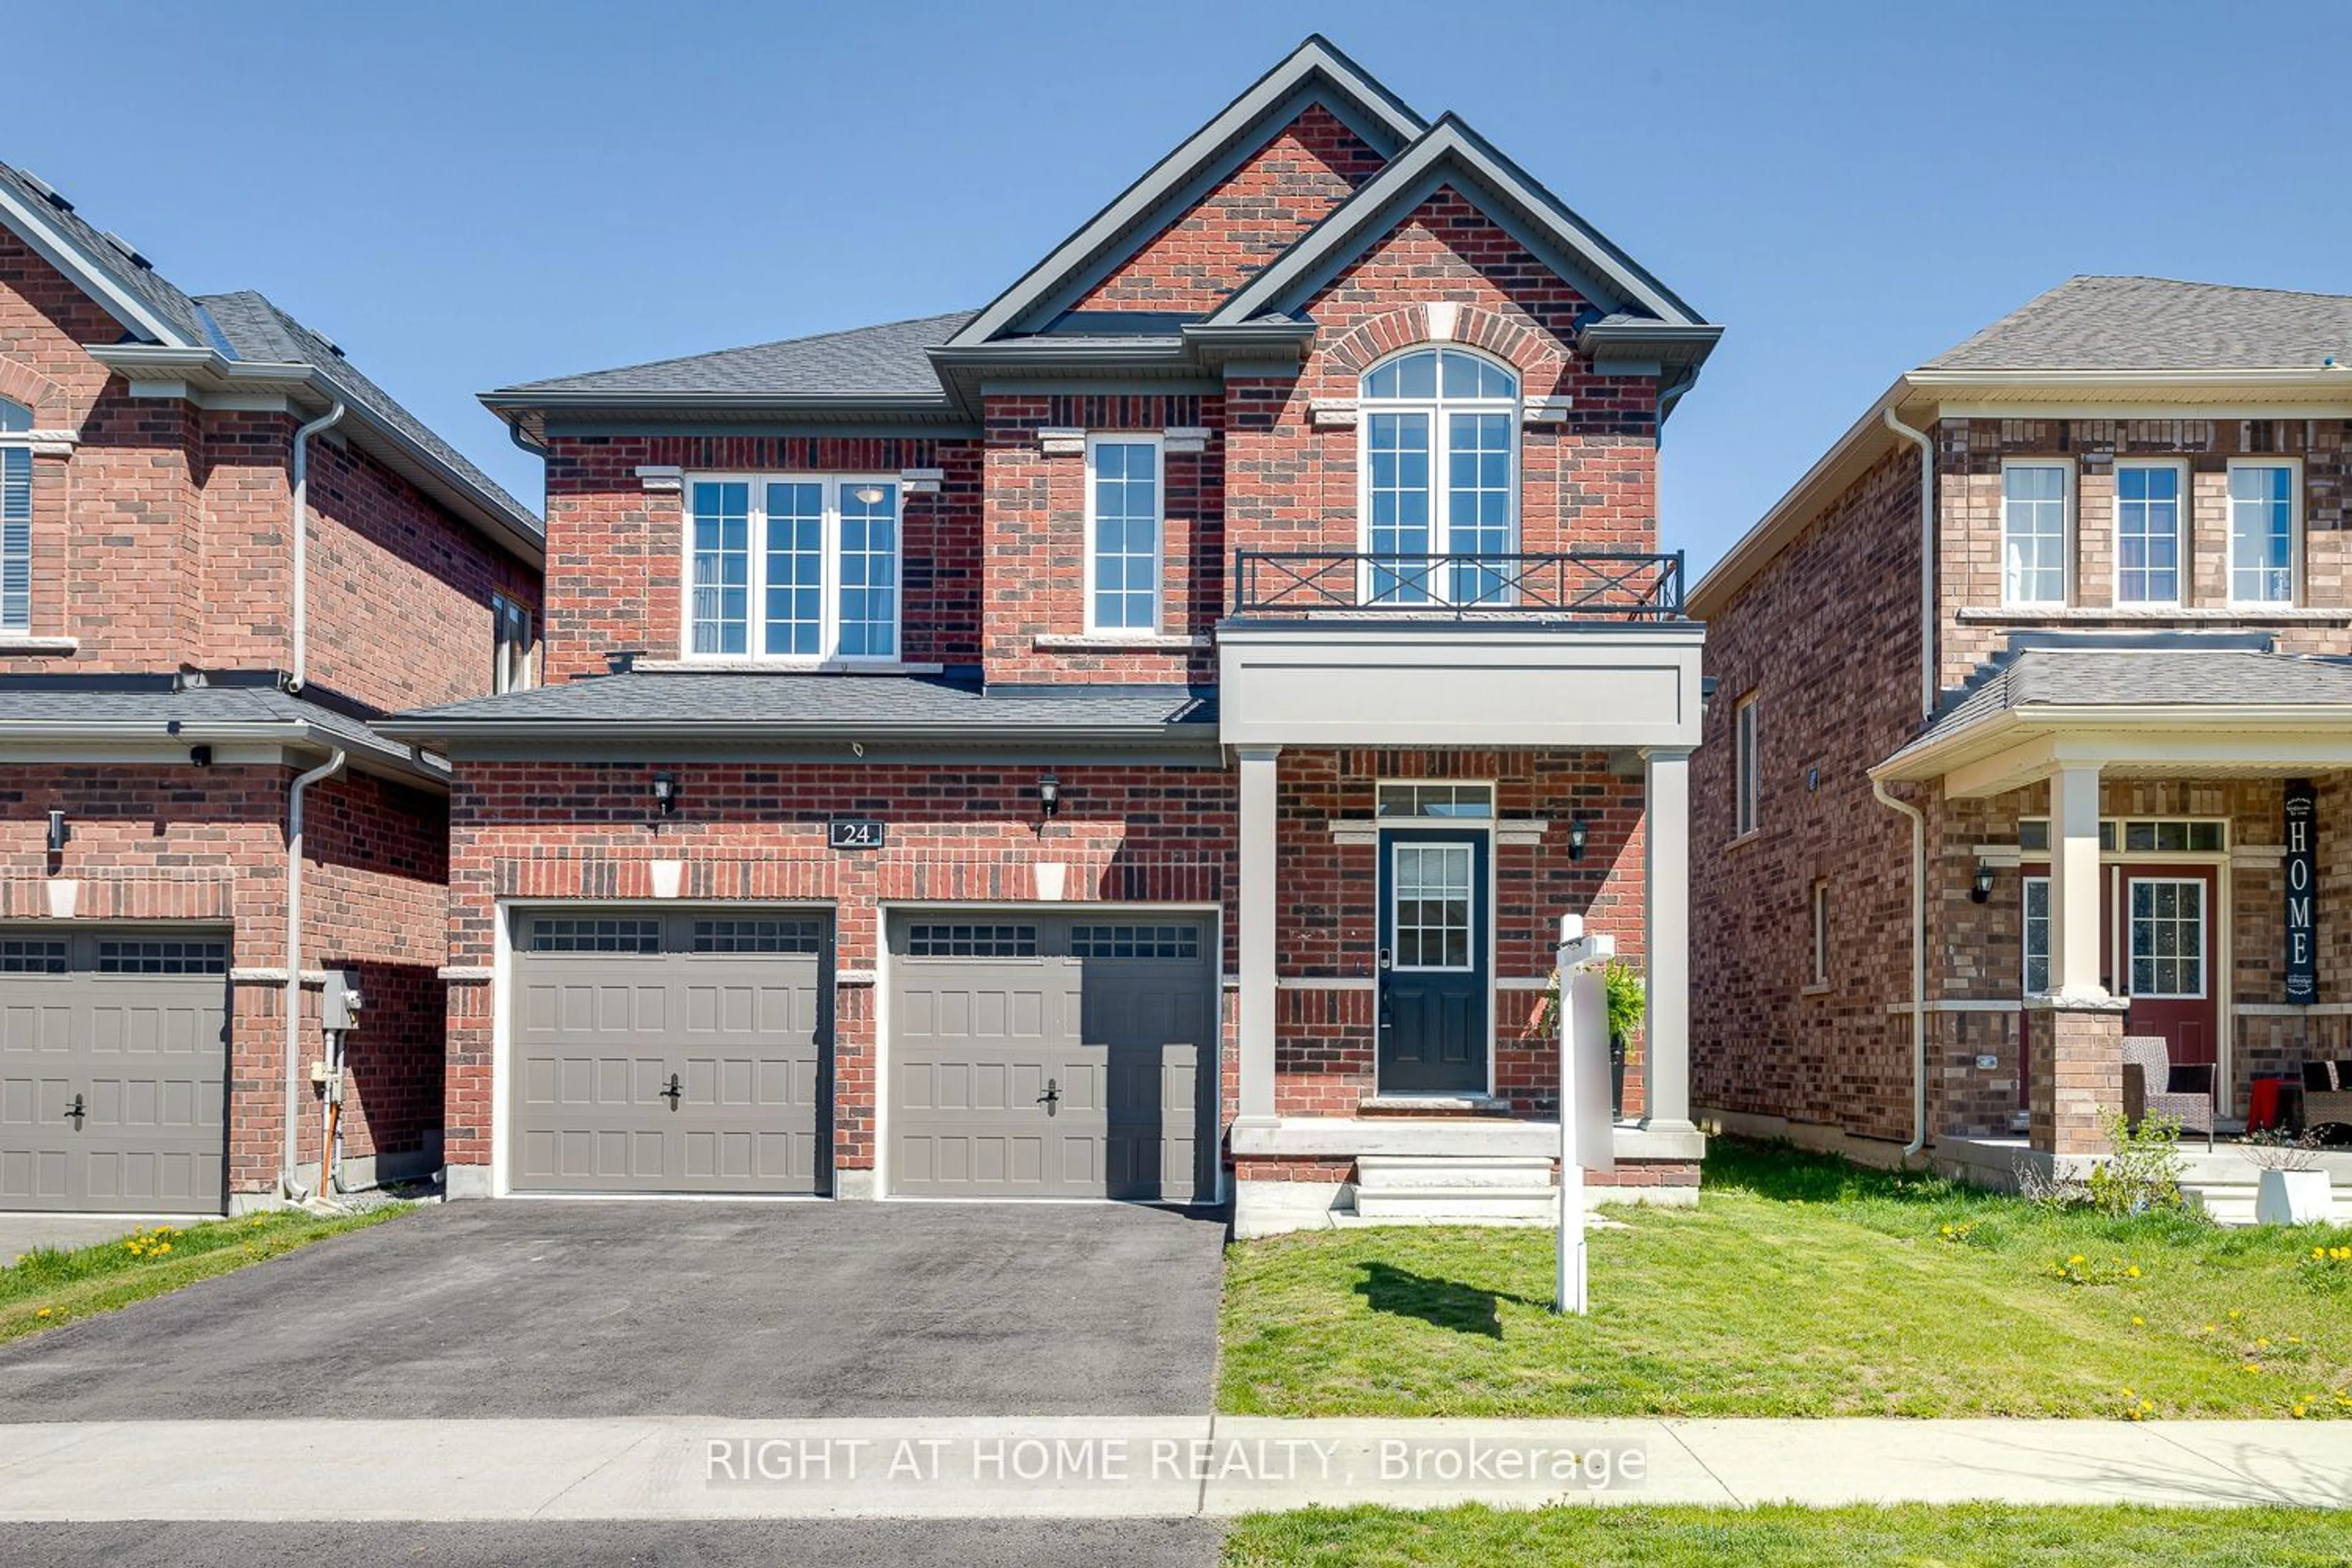 Home with brick exterior material for 24 Fernridge Hts, Cavan Monaghan Ontario L0A 1G0